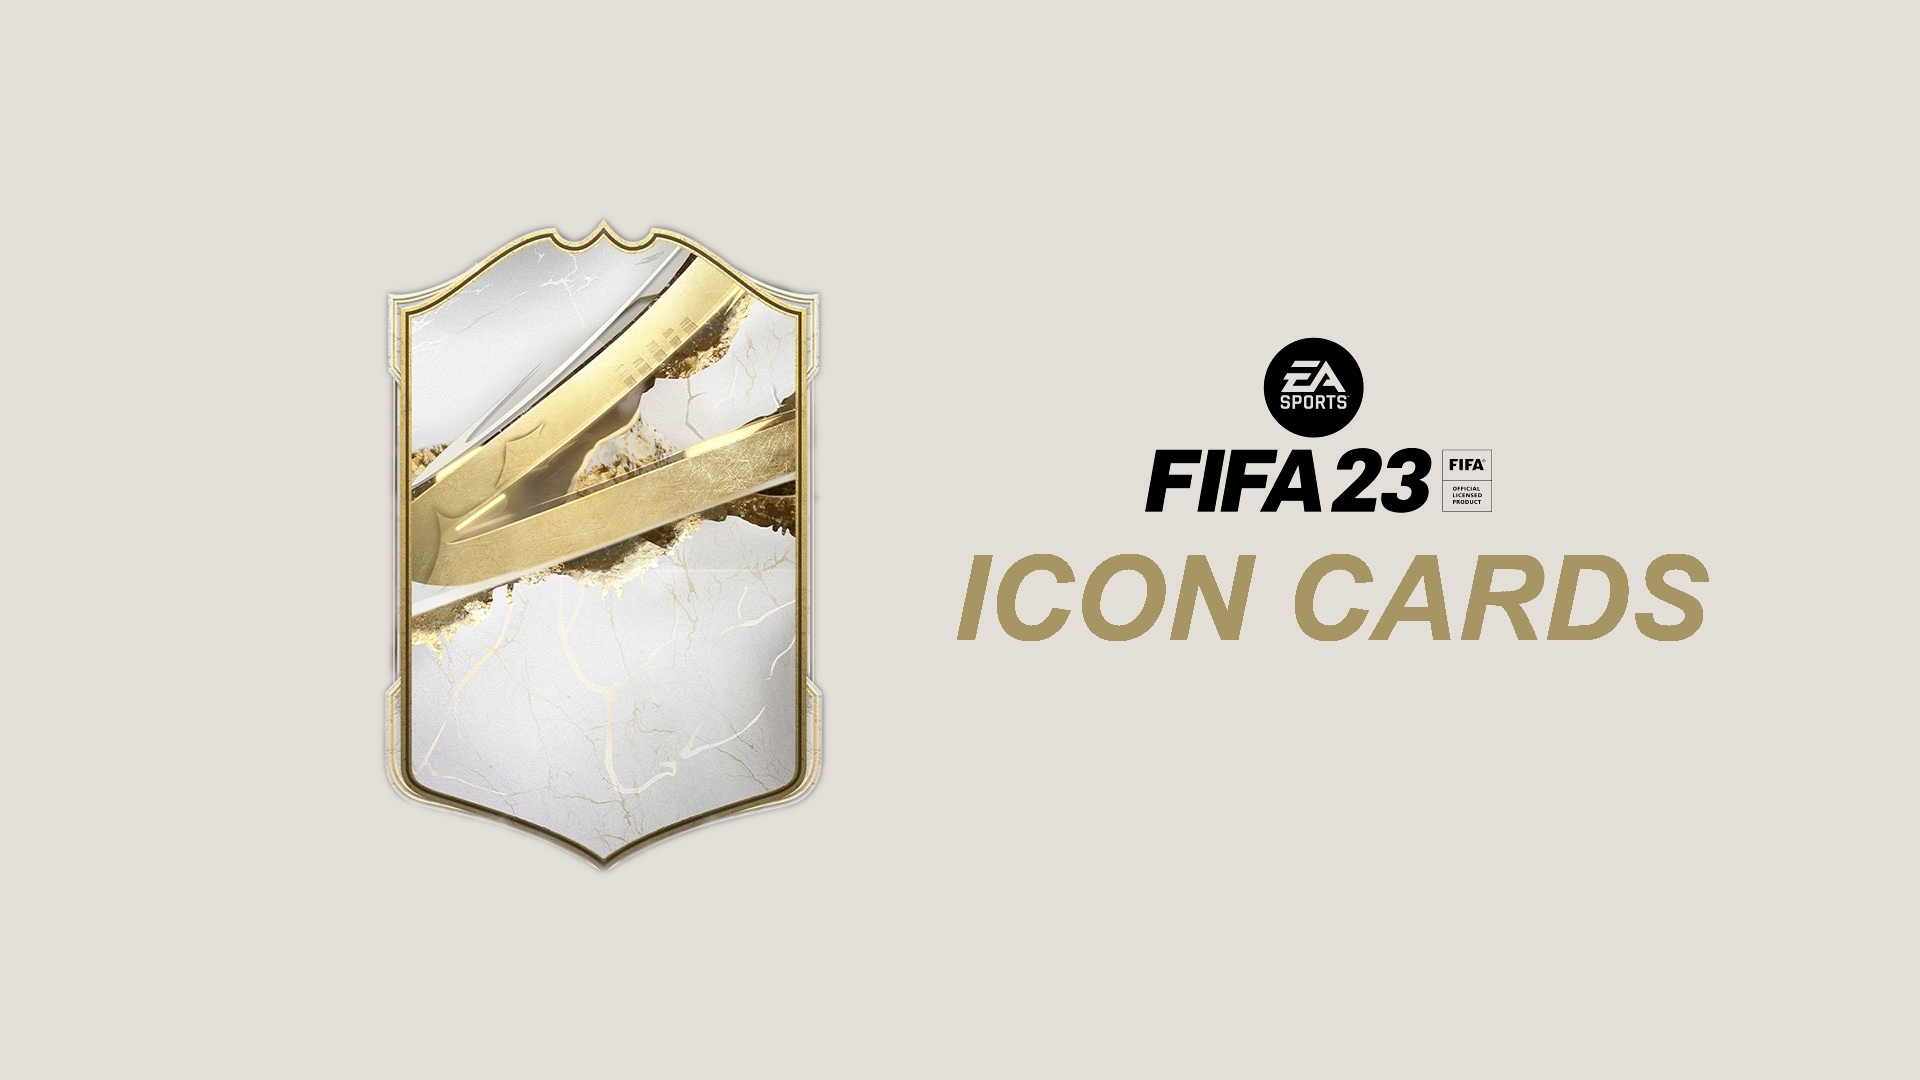 FIFA 23 Icons: Full list, new leaks, and more